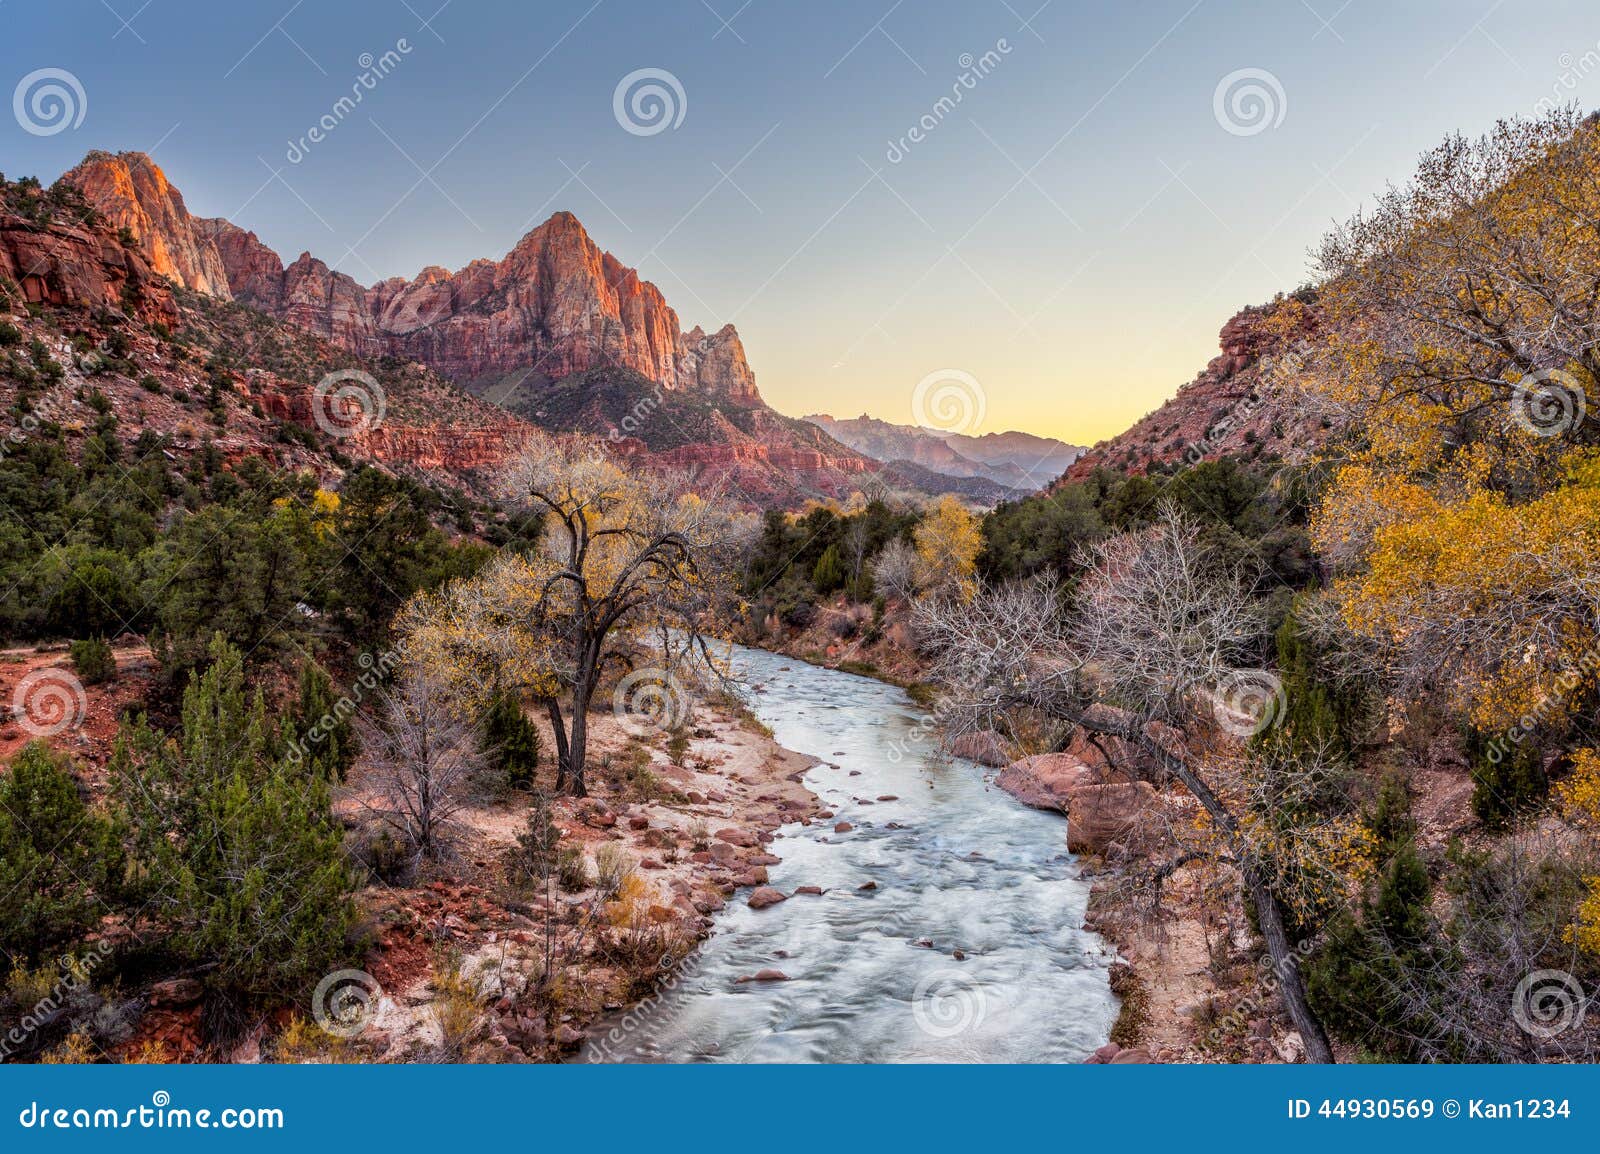 beautiful scene of zion national park , the watchman at sunset,